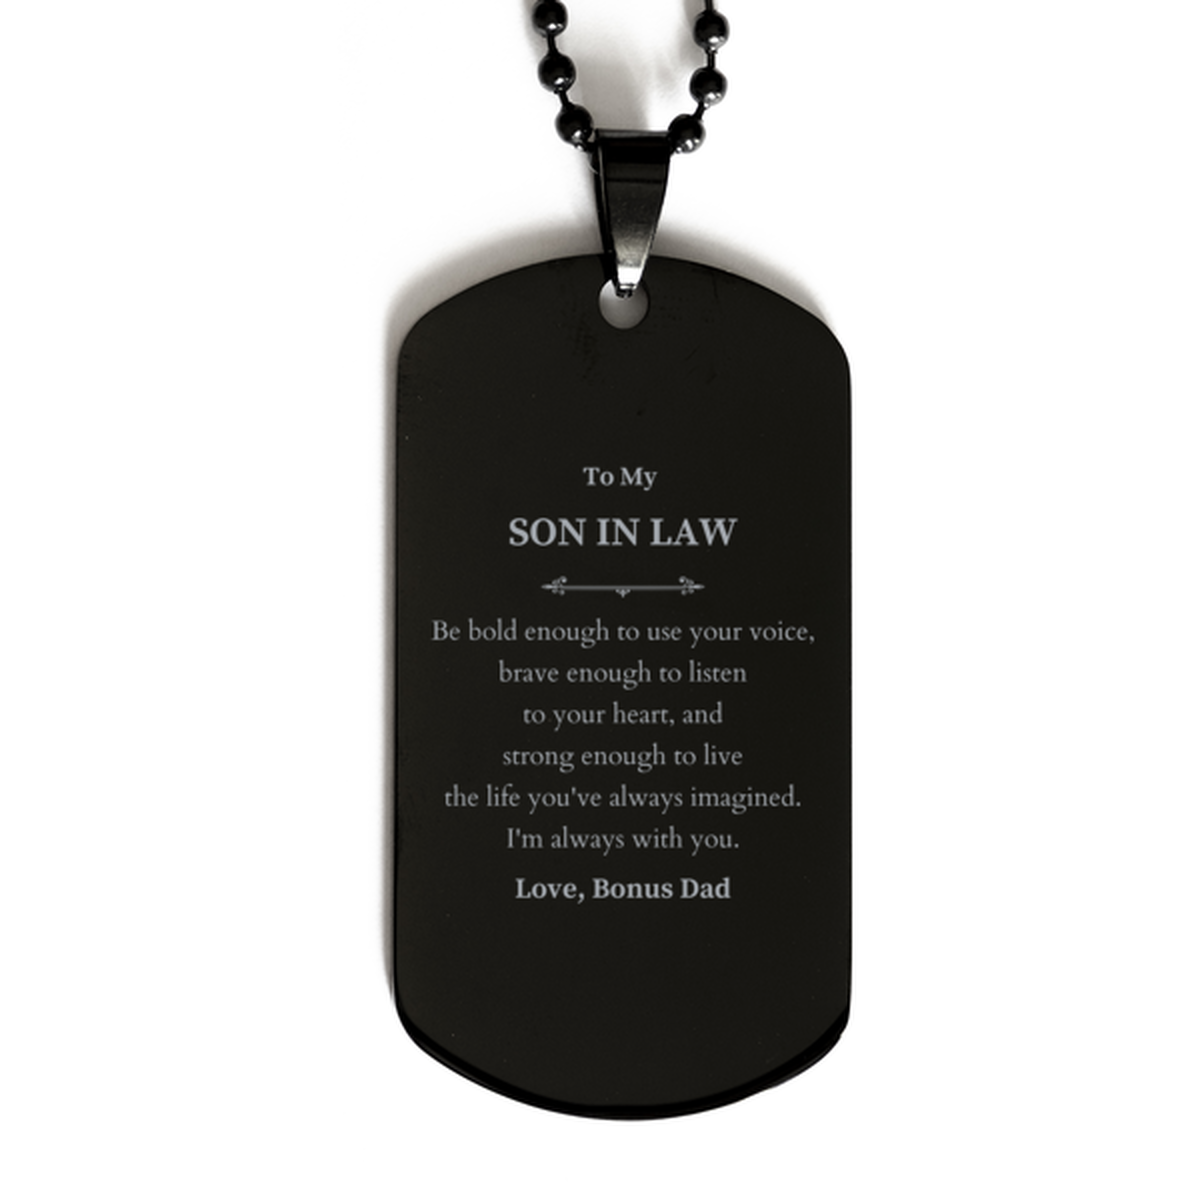 Keepsake Son In Law Black Dog Tag Gift Idea Graduation Christmas Birthday Son In Law from Bonus Dad, Son In Law Be bold enough to use your voice, brave enough to listen to your heart. Love, Bonus Dad